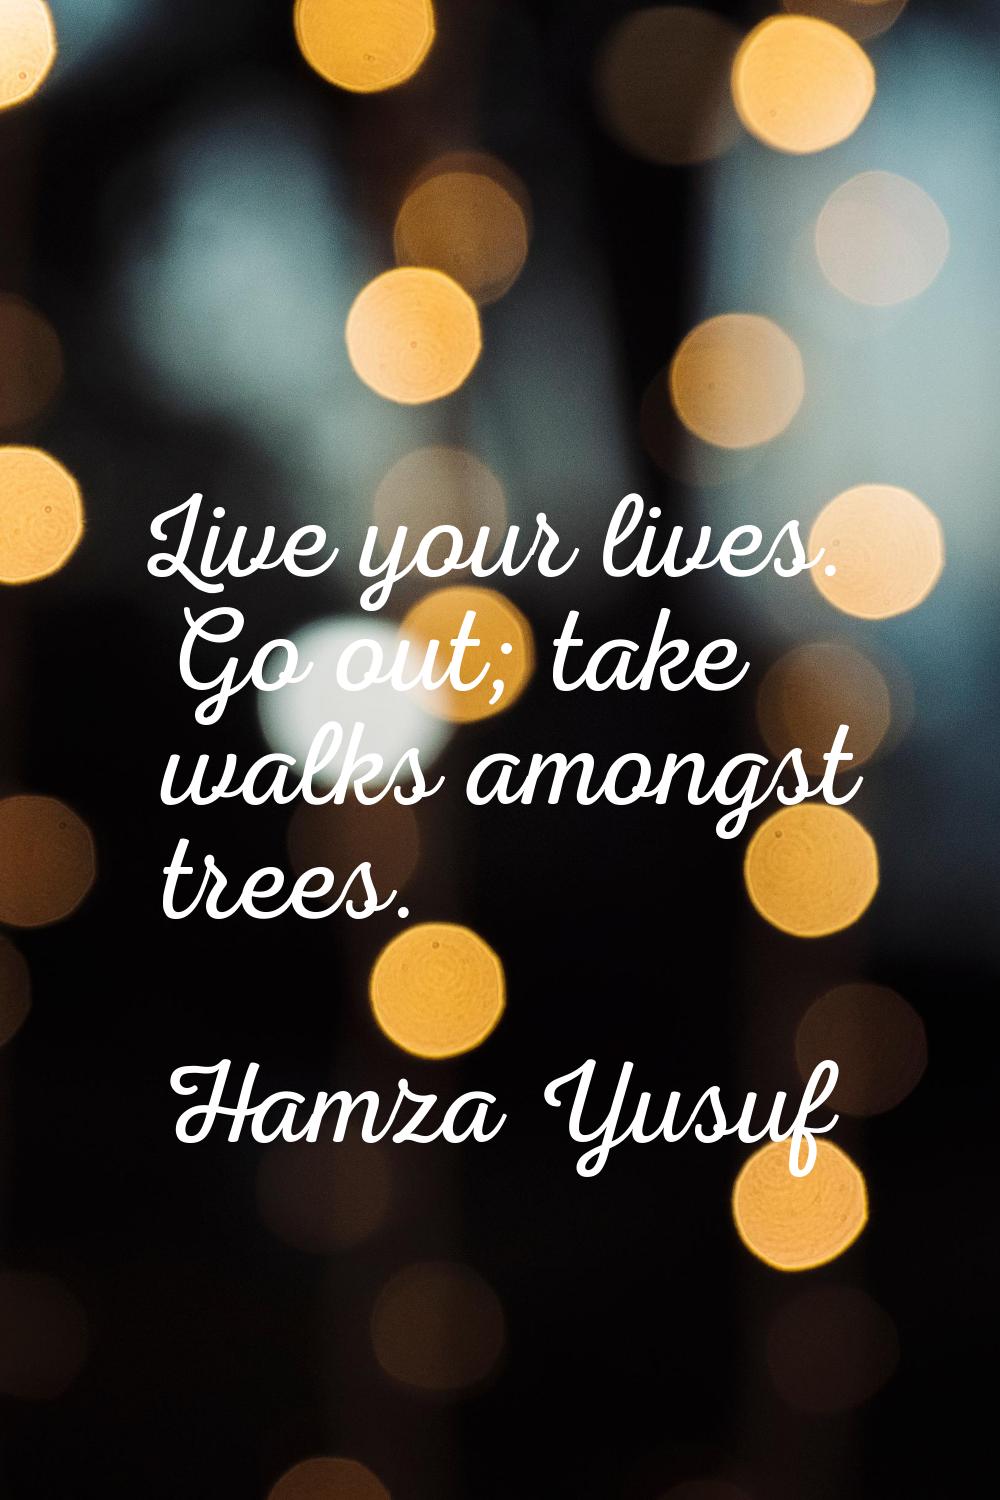 Live your lives. Go out; take walks amongst trees.